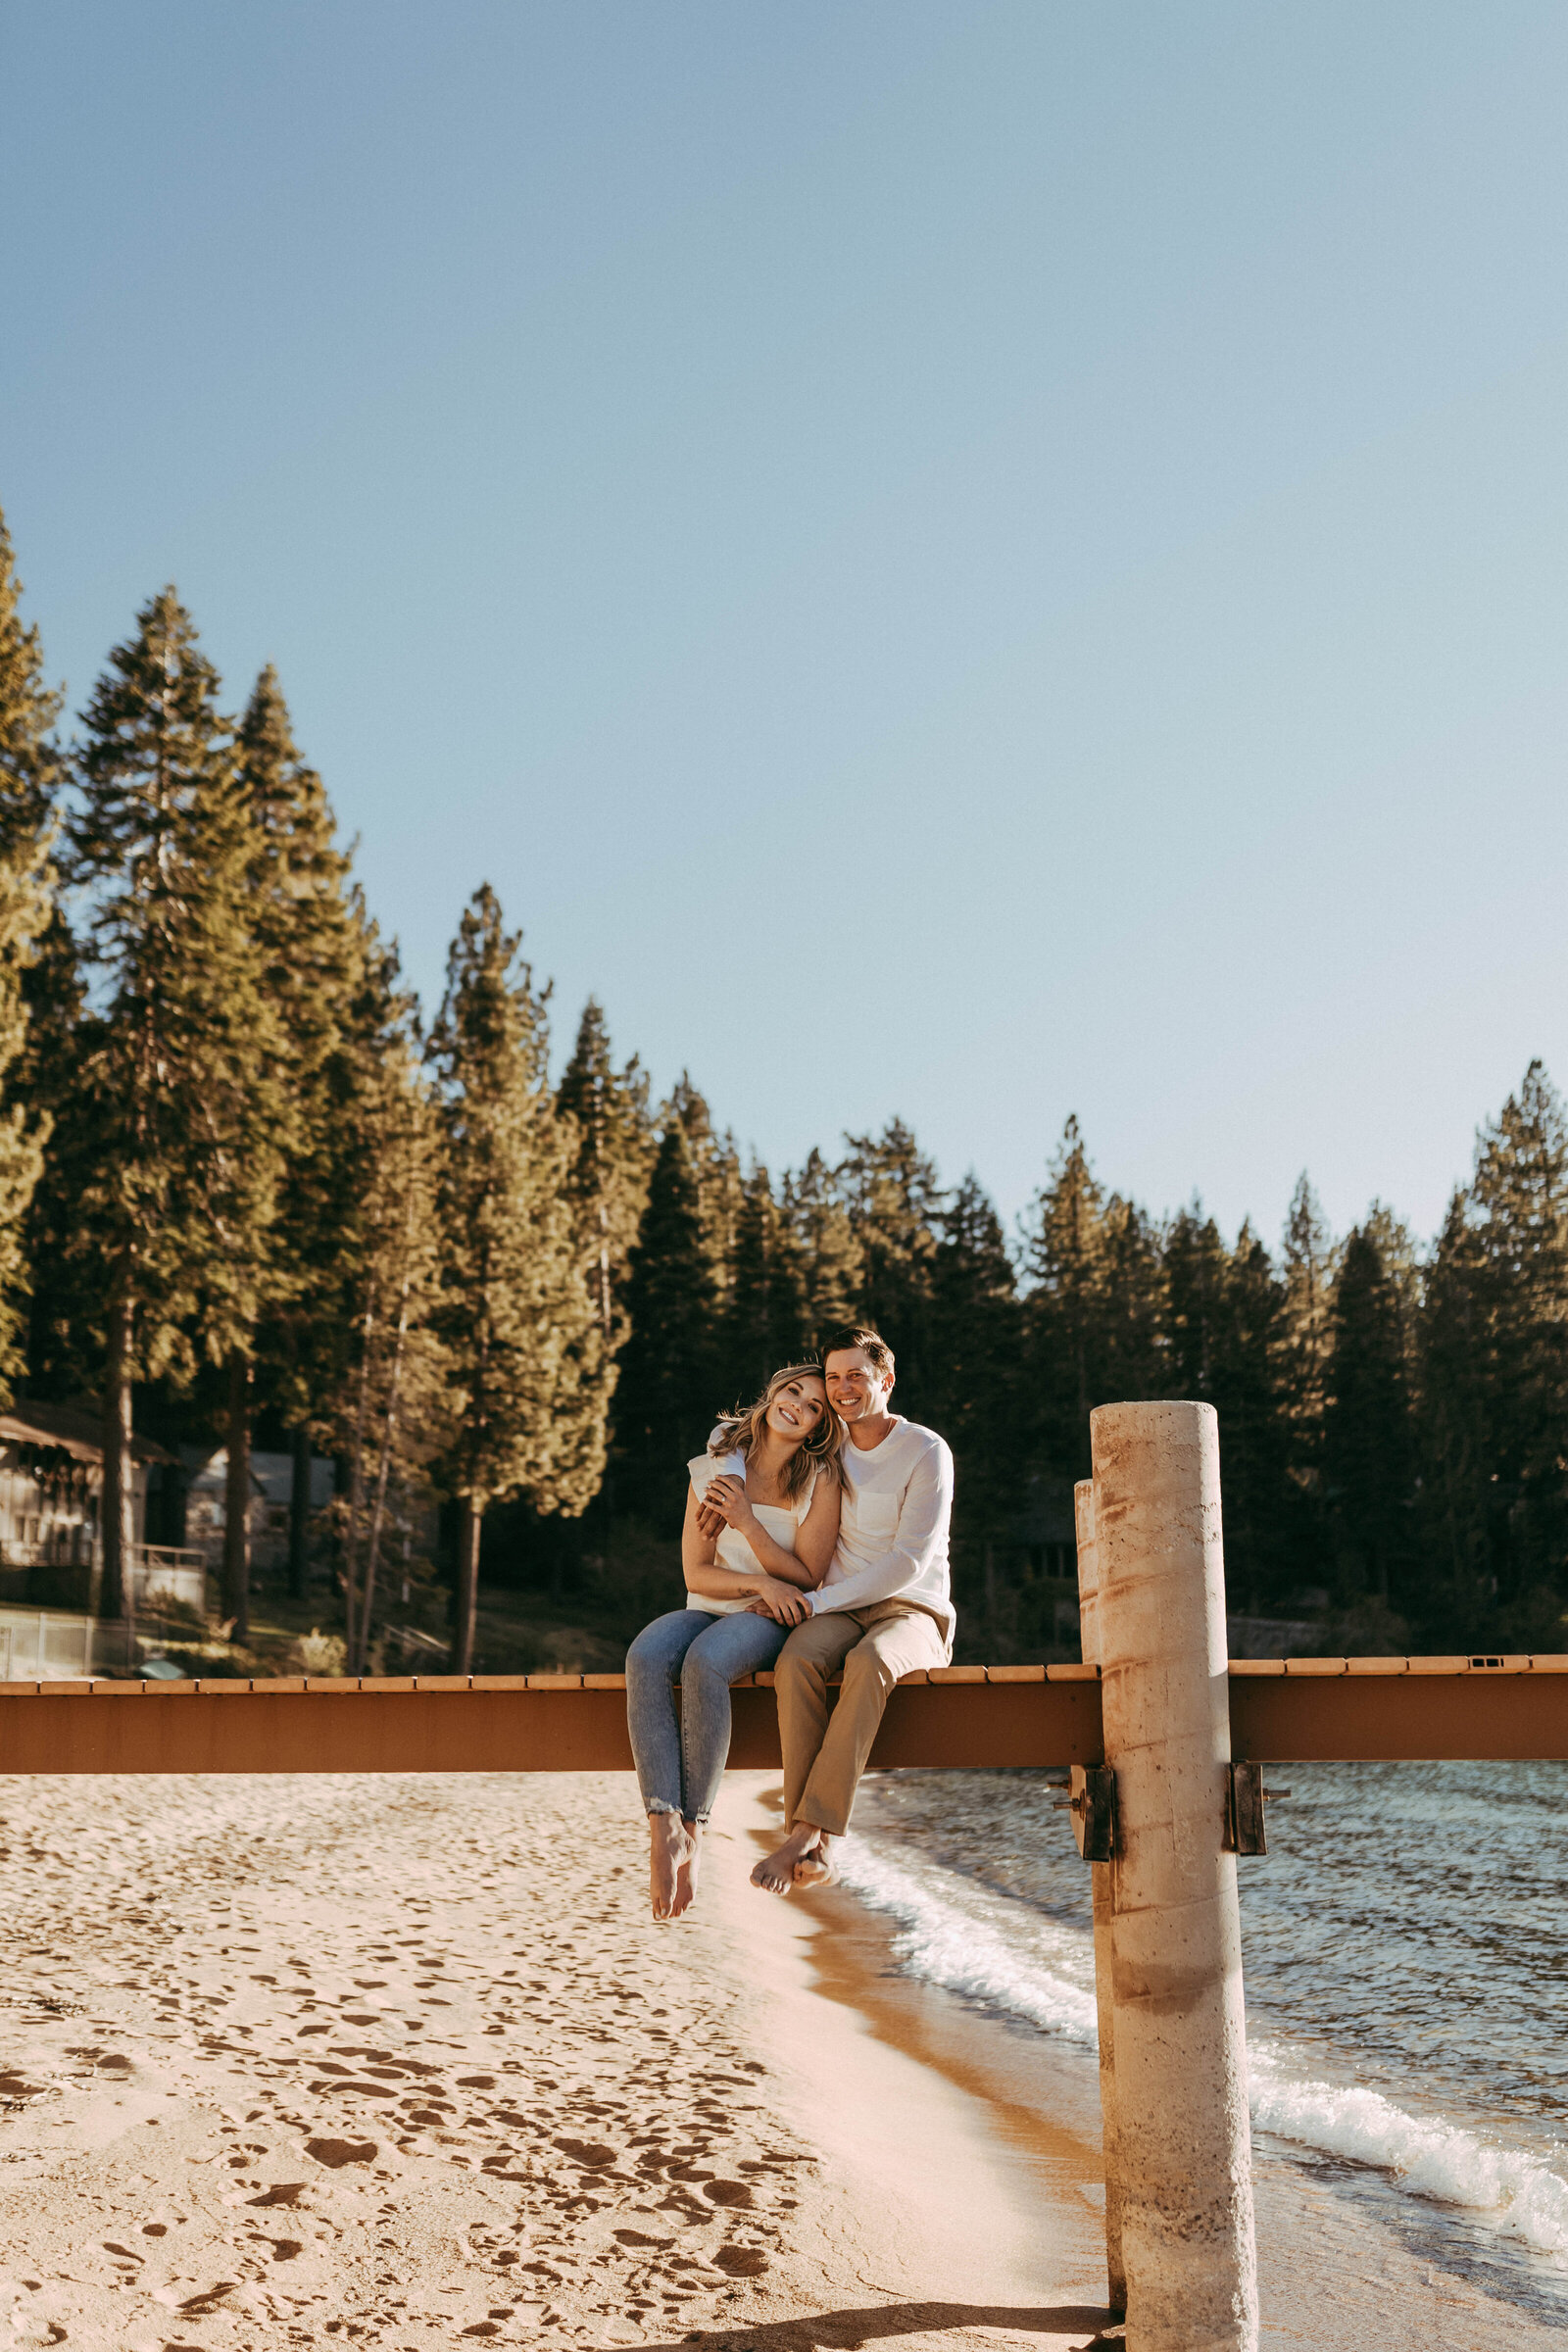 Baylee & Max Engagement Photos by Raquel King Photography in Lake Tahoe6